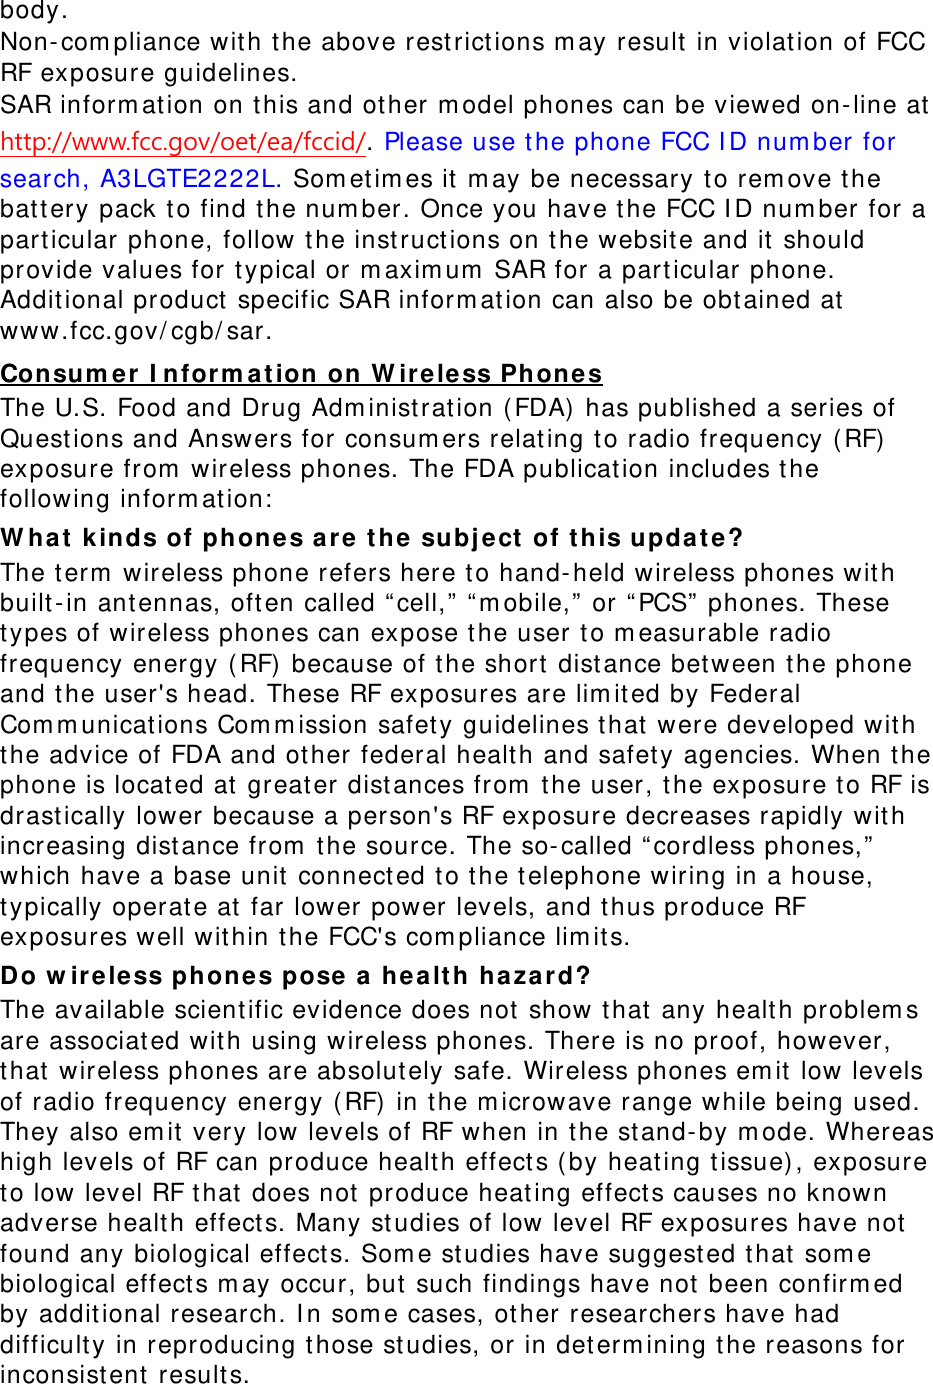 body.  Non-compliance with the above restrictions may result in violation of FCC RF exposure guidelines. SAR information on this and other model phones can be viewed on-line at http://www.fcc.gov/oet/ea/fccid/. Please use the phone FCC ID number for search, A3LGTE2222L. Sometimes it may be necessary to remove the battery pack to find the number. Once you have the FCC ID number for a particular phone, follow the instructions on the website and it should provide values for typical or maximum SAR for a particular phone. Additional product specific SAR information can also be obtained at www.fcc.gov/cgb/sar. Consumer Information on Wireless Phones The U.S. Food and Drug Administration (FDA) has published a series of Questions and Answers for consumers relating to radio frequency (RF) exposure from wireless phones. The FDA publication includes the following information: What kinds of phones are the subject of this update? The term wireless phone refers here to hand-held wireless phones with built-in antennas, often called “cell,” “mobile,” or “PCS” phones. These types of wireless phones can expose the user to measurable radio frequency energy (RF) because of the short distance between the phone and the user&apos;s head. These RF exposures are limited by Federal Communications Commission safety guidelines that were developed with the advice of FDA and other federal health and safety agencies. When the phone is located at greater distances from the user, the exposure to RF is drastically lower because a person&apos;s RF exposure decreases rapidly with increasing distance from the source. The so-called “cordless phones,” which have a base unit connected to the telephone wiring in a house, typically operate at far lower power levels, and thus produce RF exposures well within the FCC&apos;s compliance limits. Do wireless phones pose a health hazard? The available scientific evidence does not show that any health problems are associated with using wireless phones. There is no proof, however, that wireless phones are absolutely safe. Wireless phones emit low levels of radio frequency energy (RF) in the microwave range while being used. They also emit very low levels of RF when in the stand-by mode. Whereas high levels of RF can produce health effects (by heating tissue), exposure to low level RF that does not produce heating effects causes no known adverse health effects. Many studies of low level RF exposures have not found any biological effects. Some studies have suggested that some biological effects may occur, but such findings have not been confirmed by additional research. In some cases, other researchers have had difficulty in reproducing those studies, or in determining the reasons for inconsistent results. 